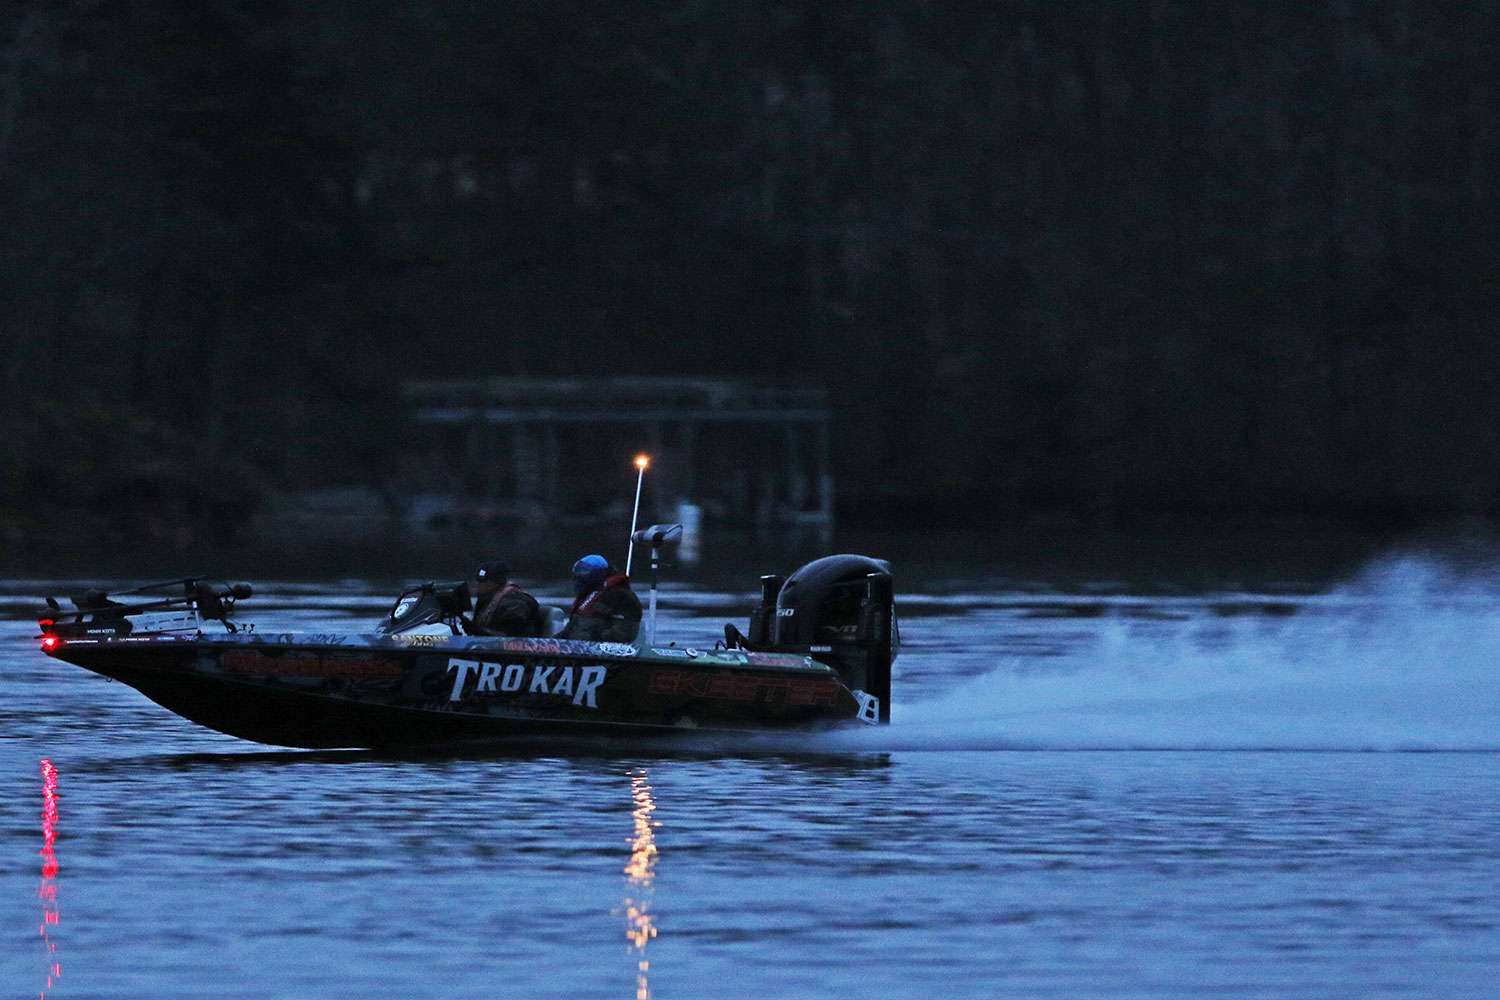 Chris Zaldain gets in on some early spotted-bass action on Day 2 of the 2019 Toyota Bassmaster Elite at Lake Lanier.